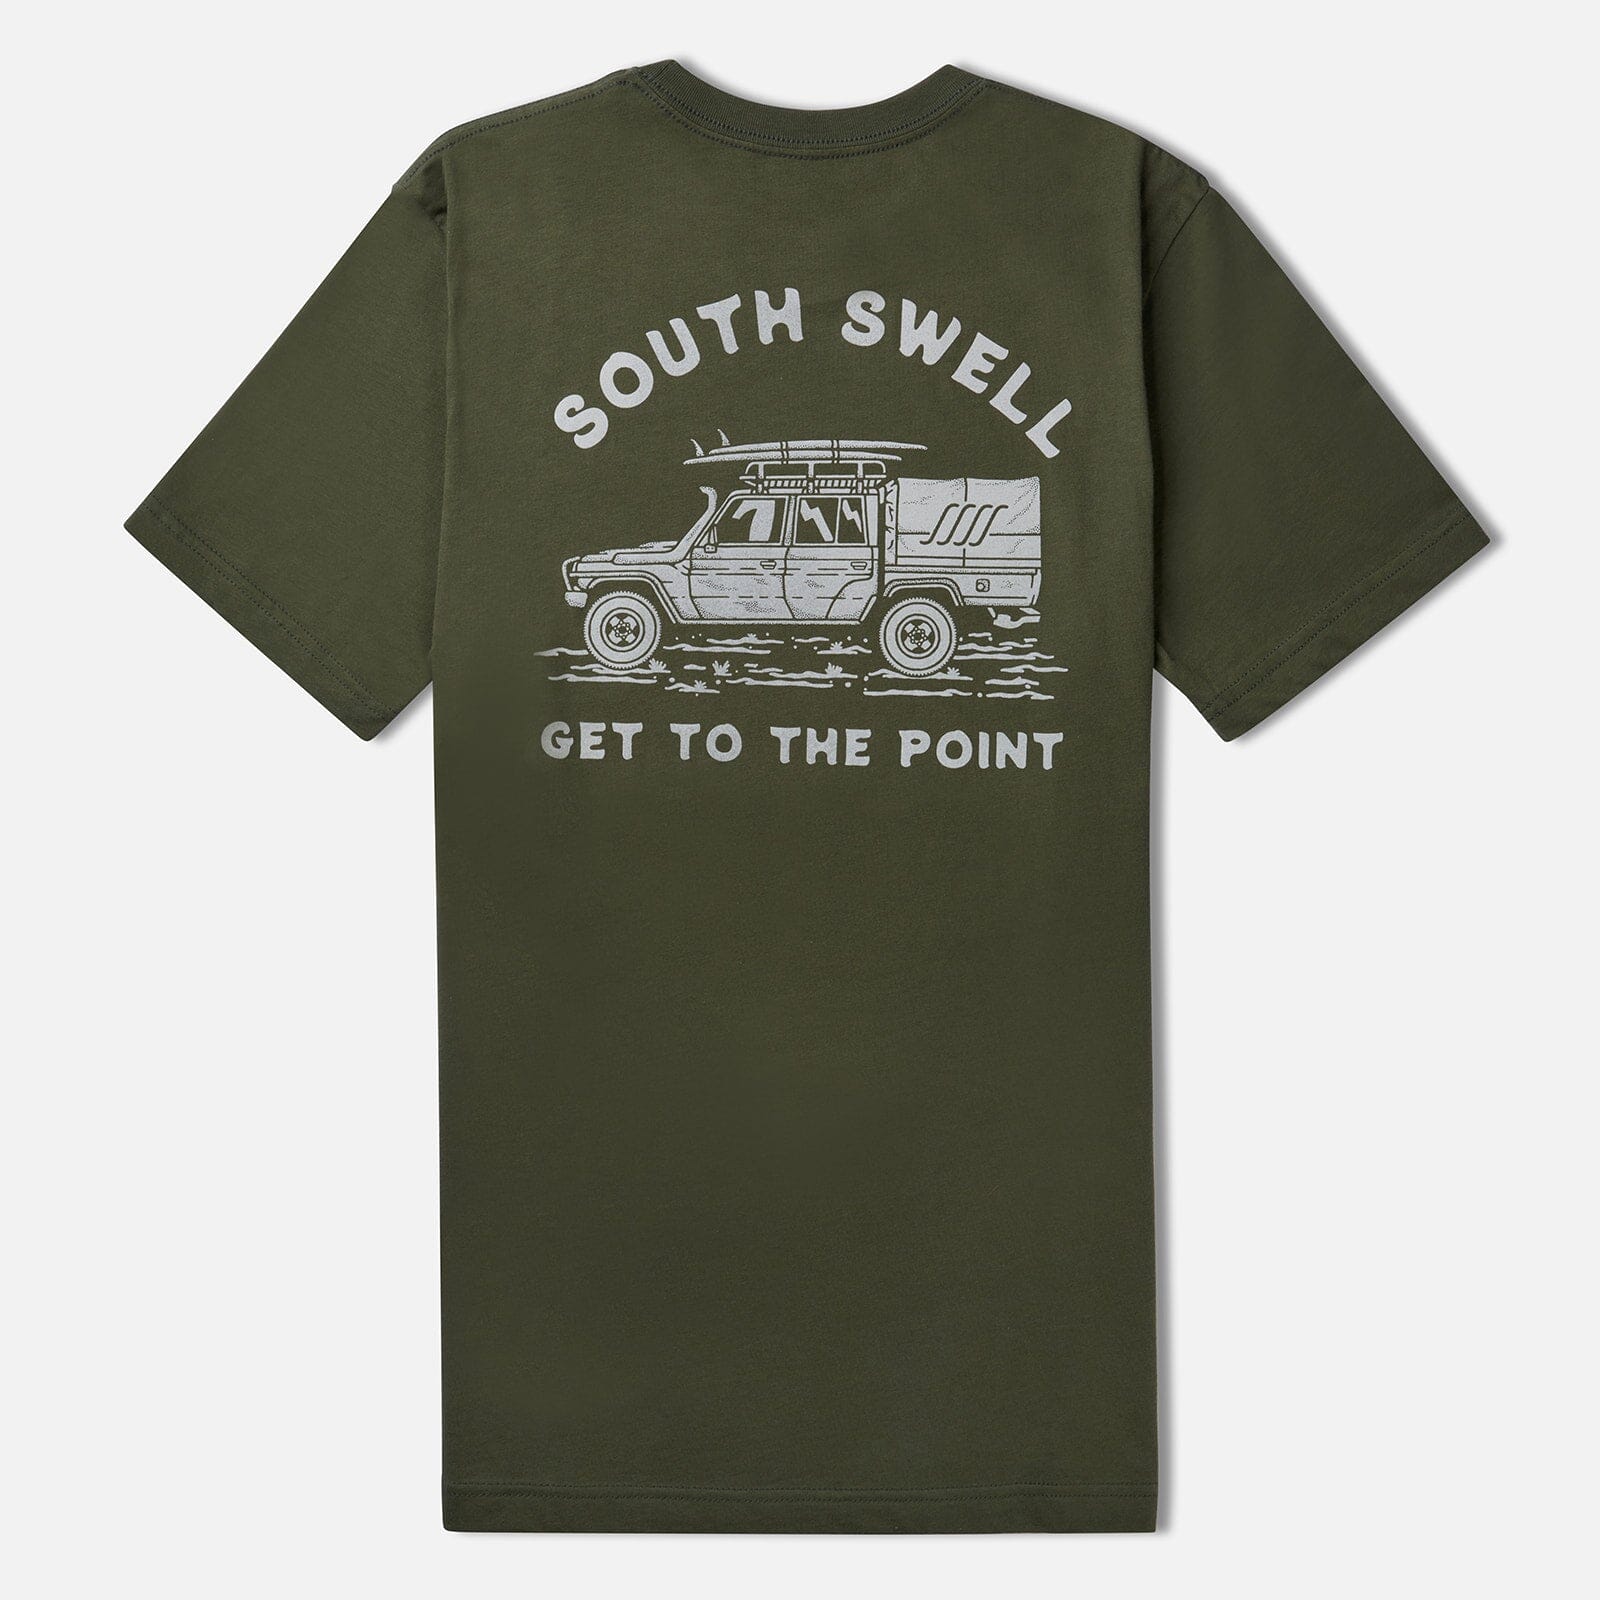 SOUTH SWELL Get To The Point Tee M Tees SOUTH SWELL S Military Green 